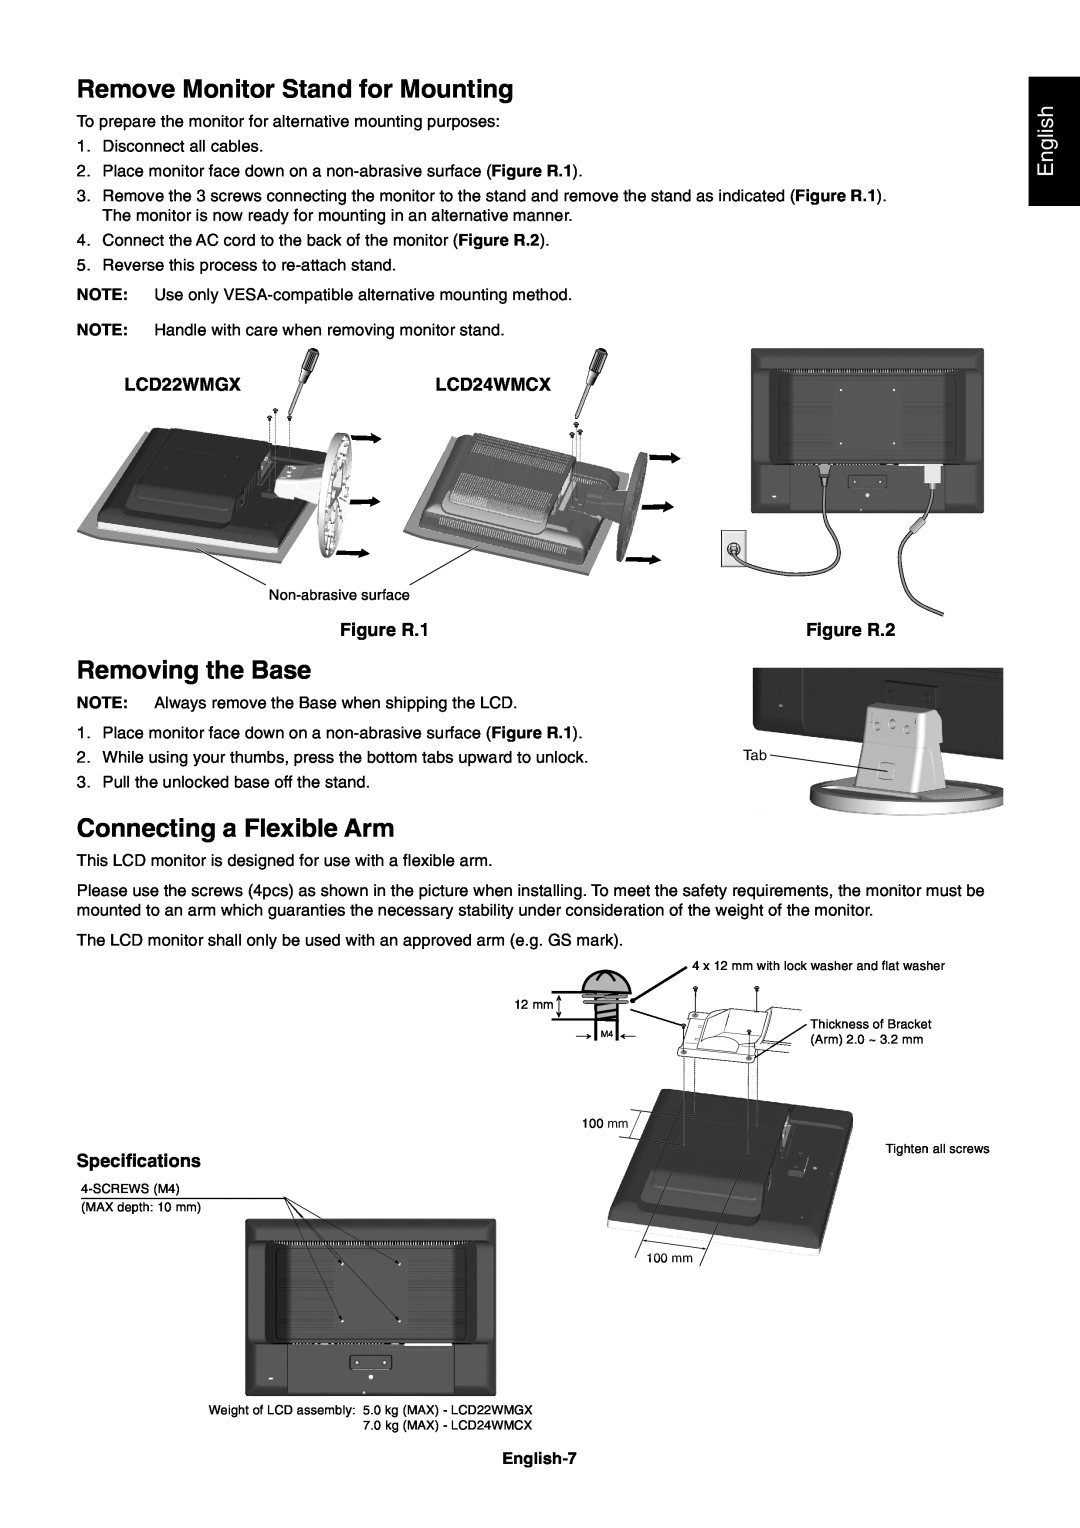 NEC Remove Monitor Stand for Mounting, Removing the Base, Connecting a Flexible Arm, English, LCD22WMGXLCD24WMCX 